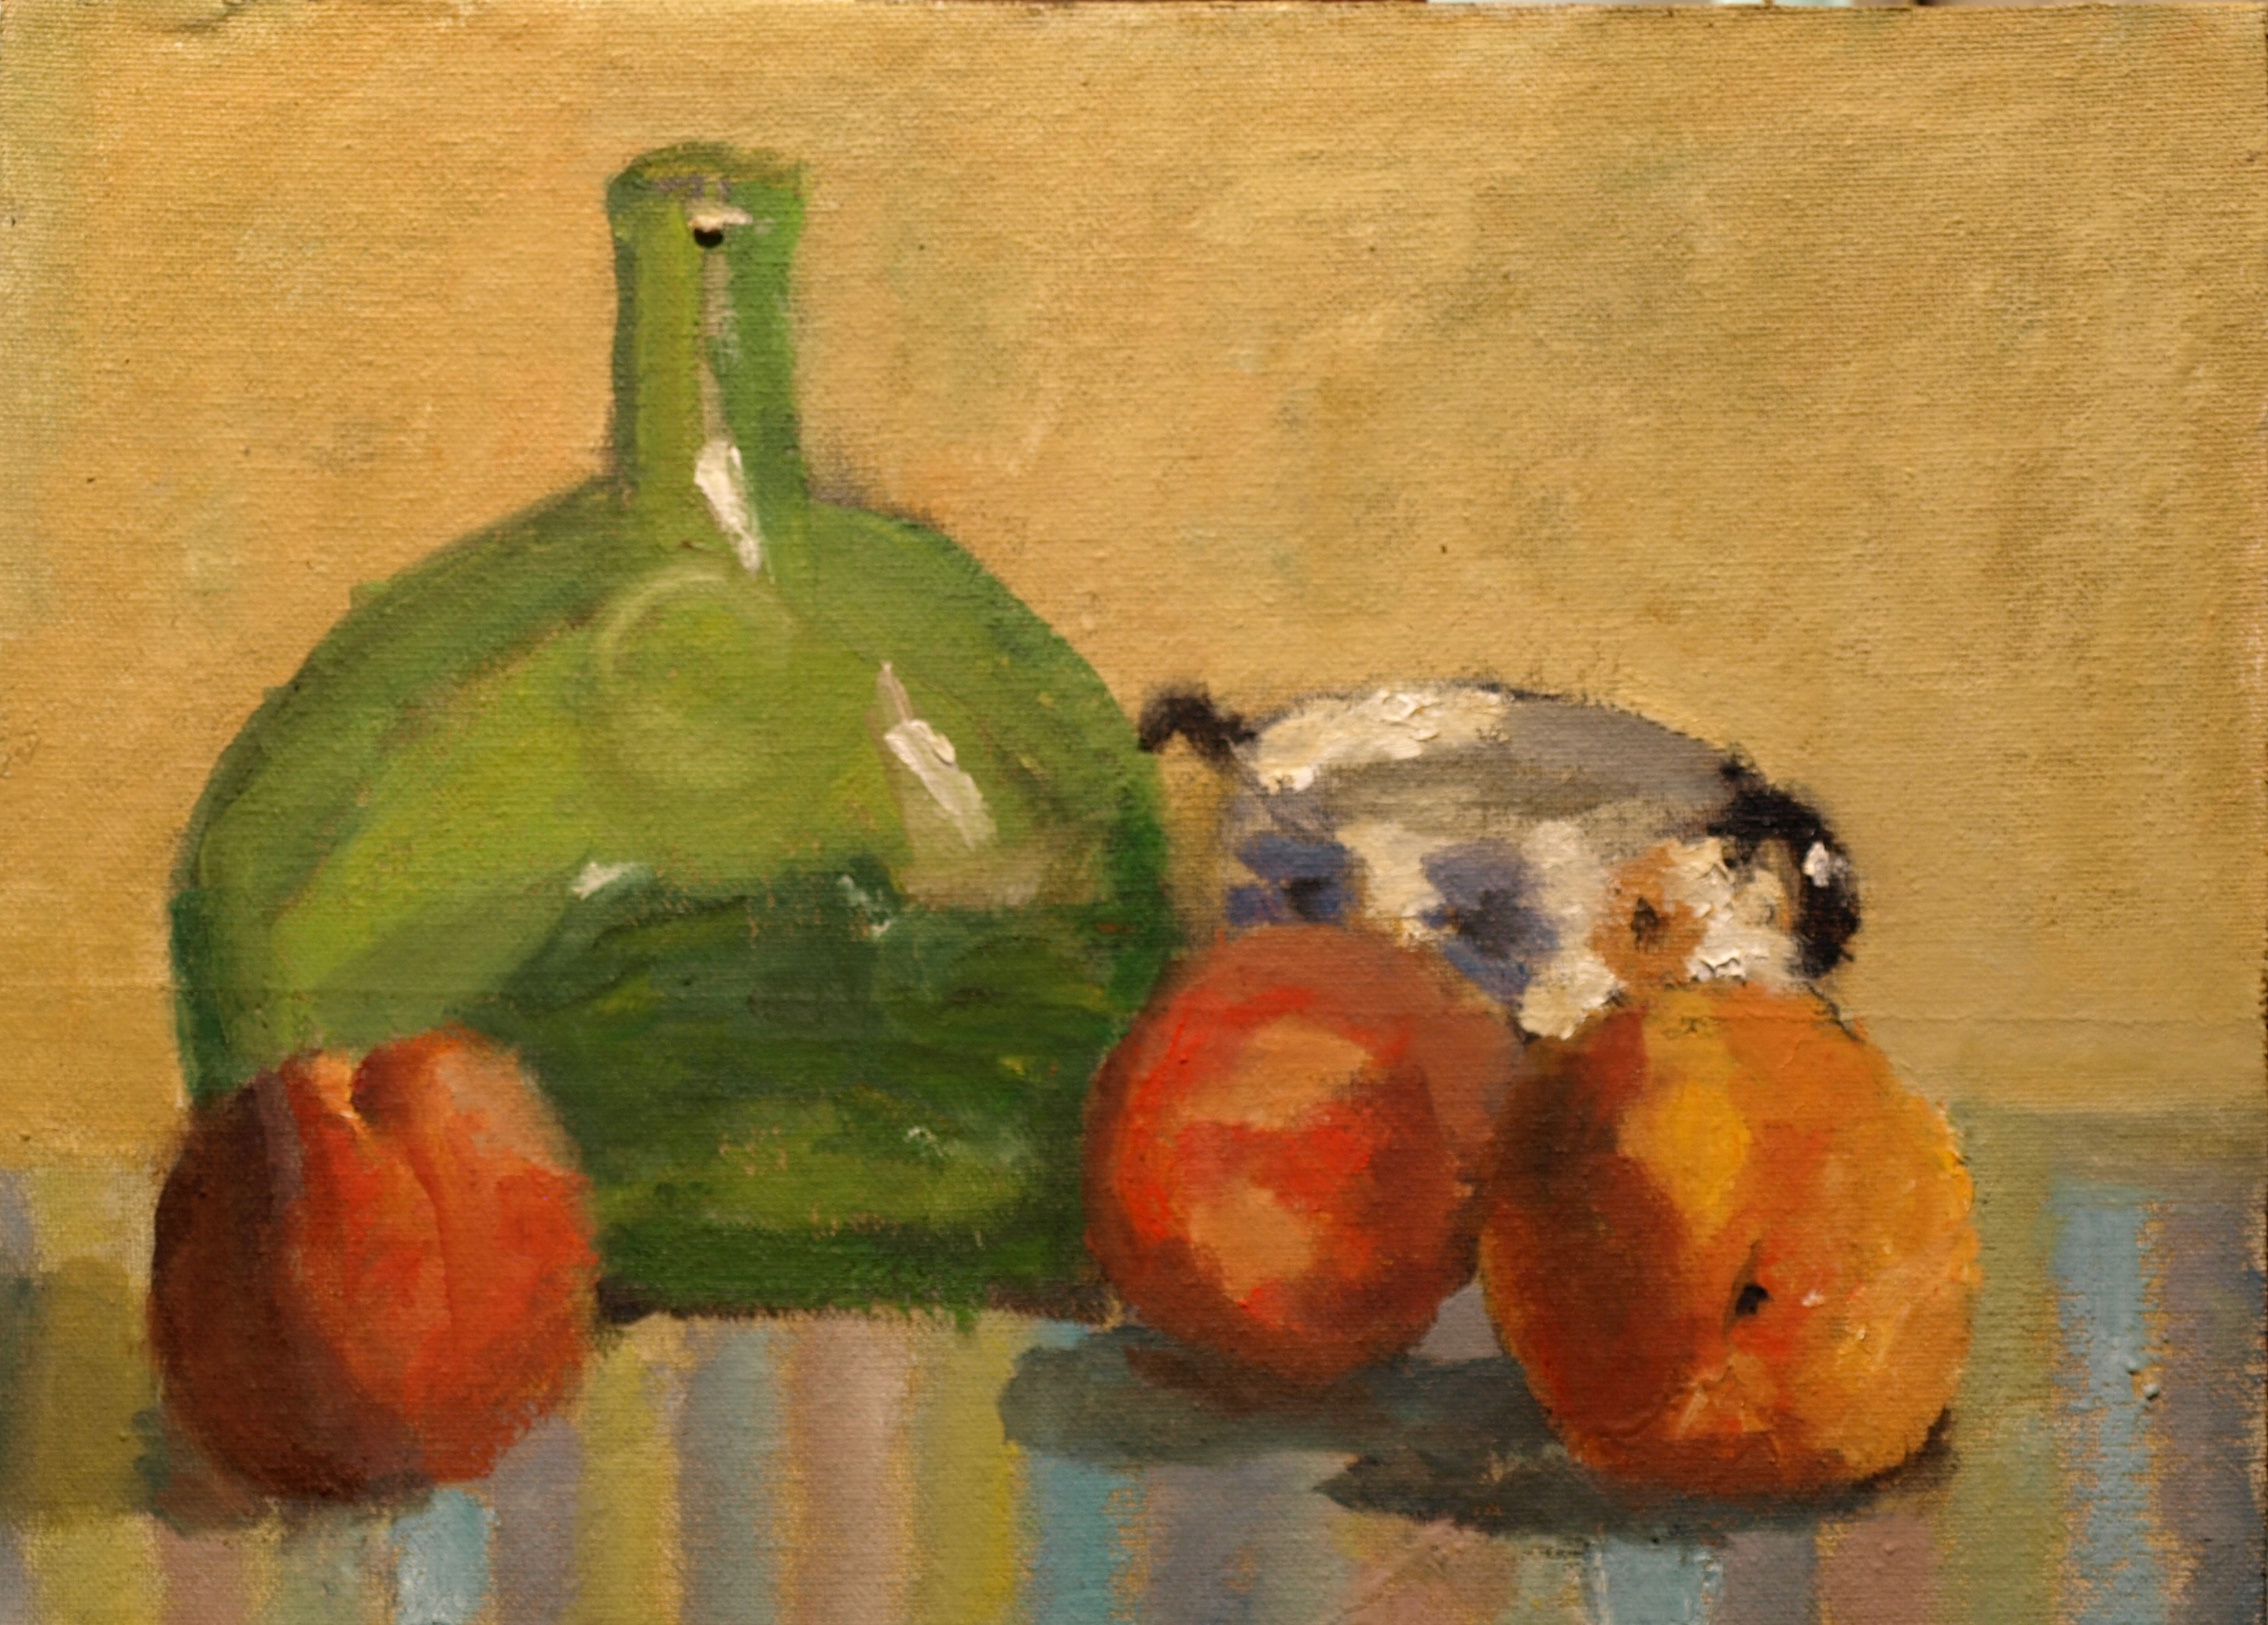 Peaches and Green Bottle, Oil on Canvas on Panel, 9 x 12 Inches, by Richard Stalter, $220